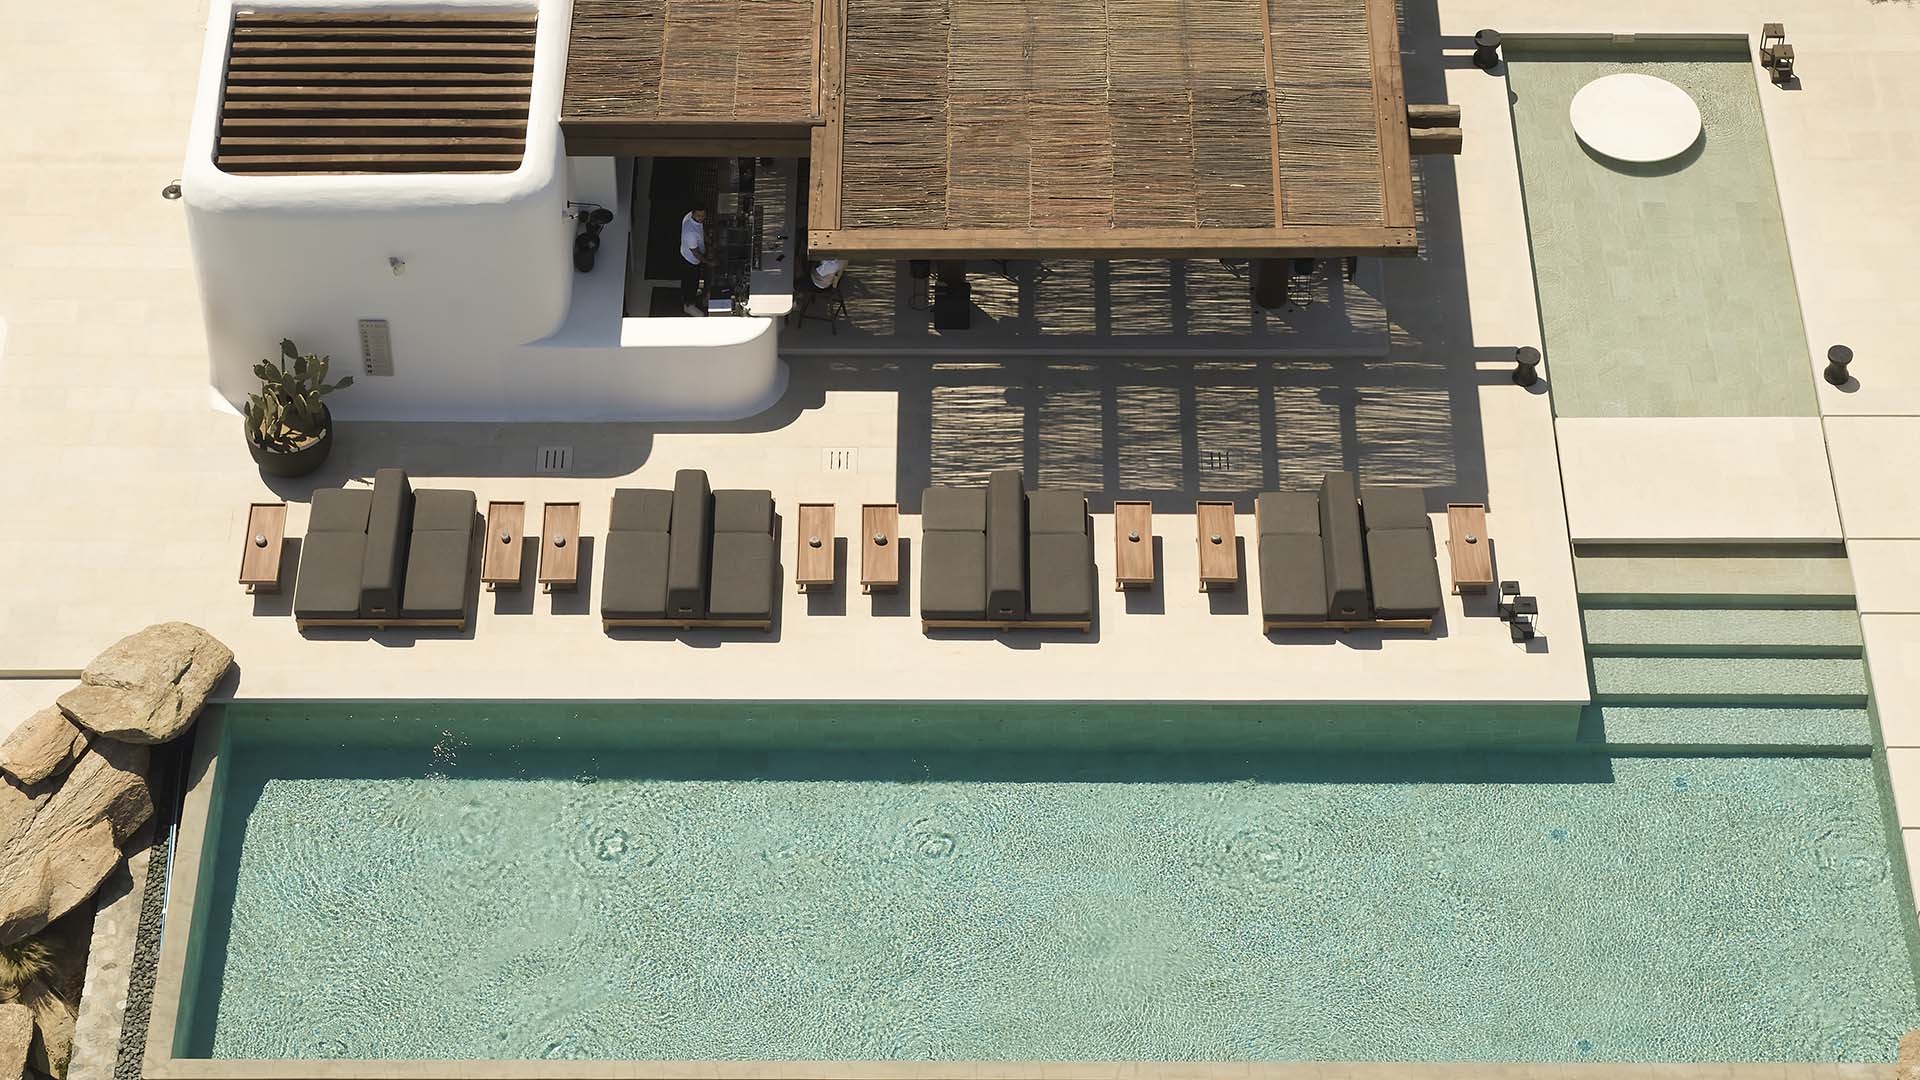 A tranquil poolside scene at Kalesma Hotel in Mykonos, inviting relaxation and enjoyment.